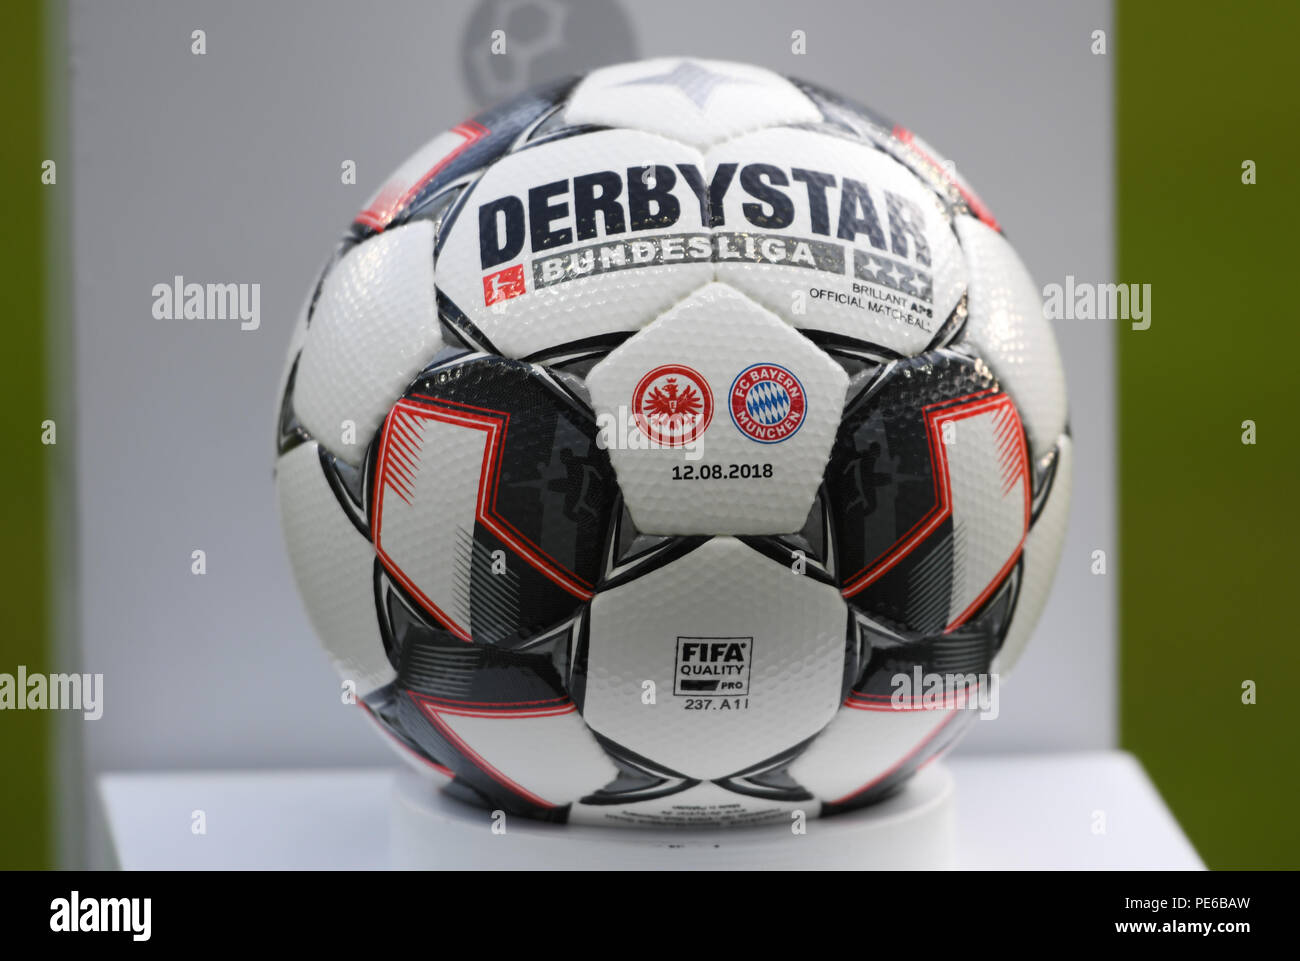 Frankurt am Main, Germany. 12th Aug, 2018. Soccer: DFL-Supercup, Eintracht  Frankfurt vs Bayern Munich in the Commerzbank-Arena. The official DFL match  ball of Derbystar with the club logos of both teams. Credit: